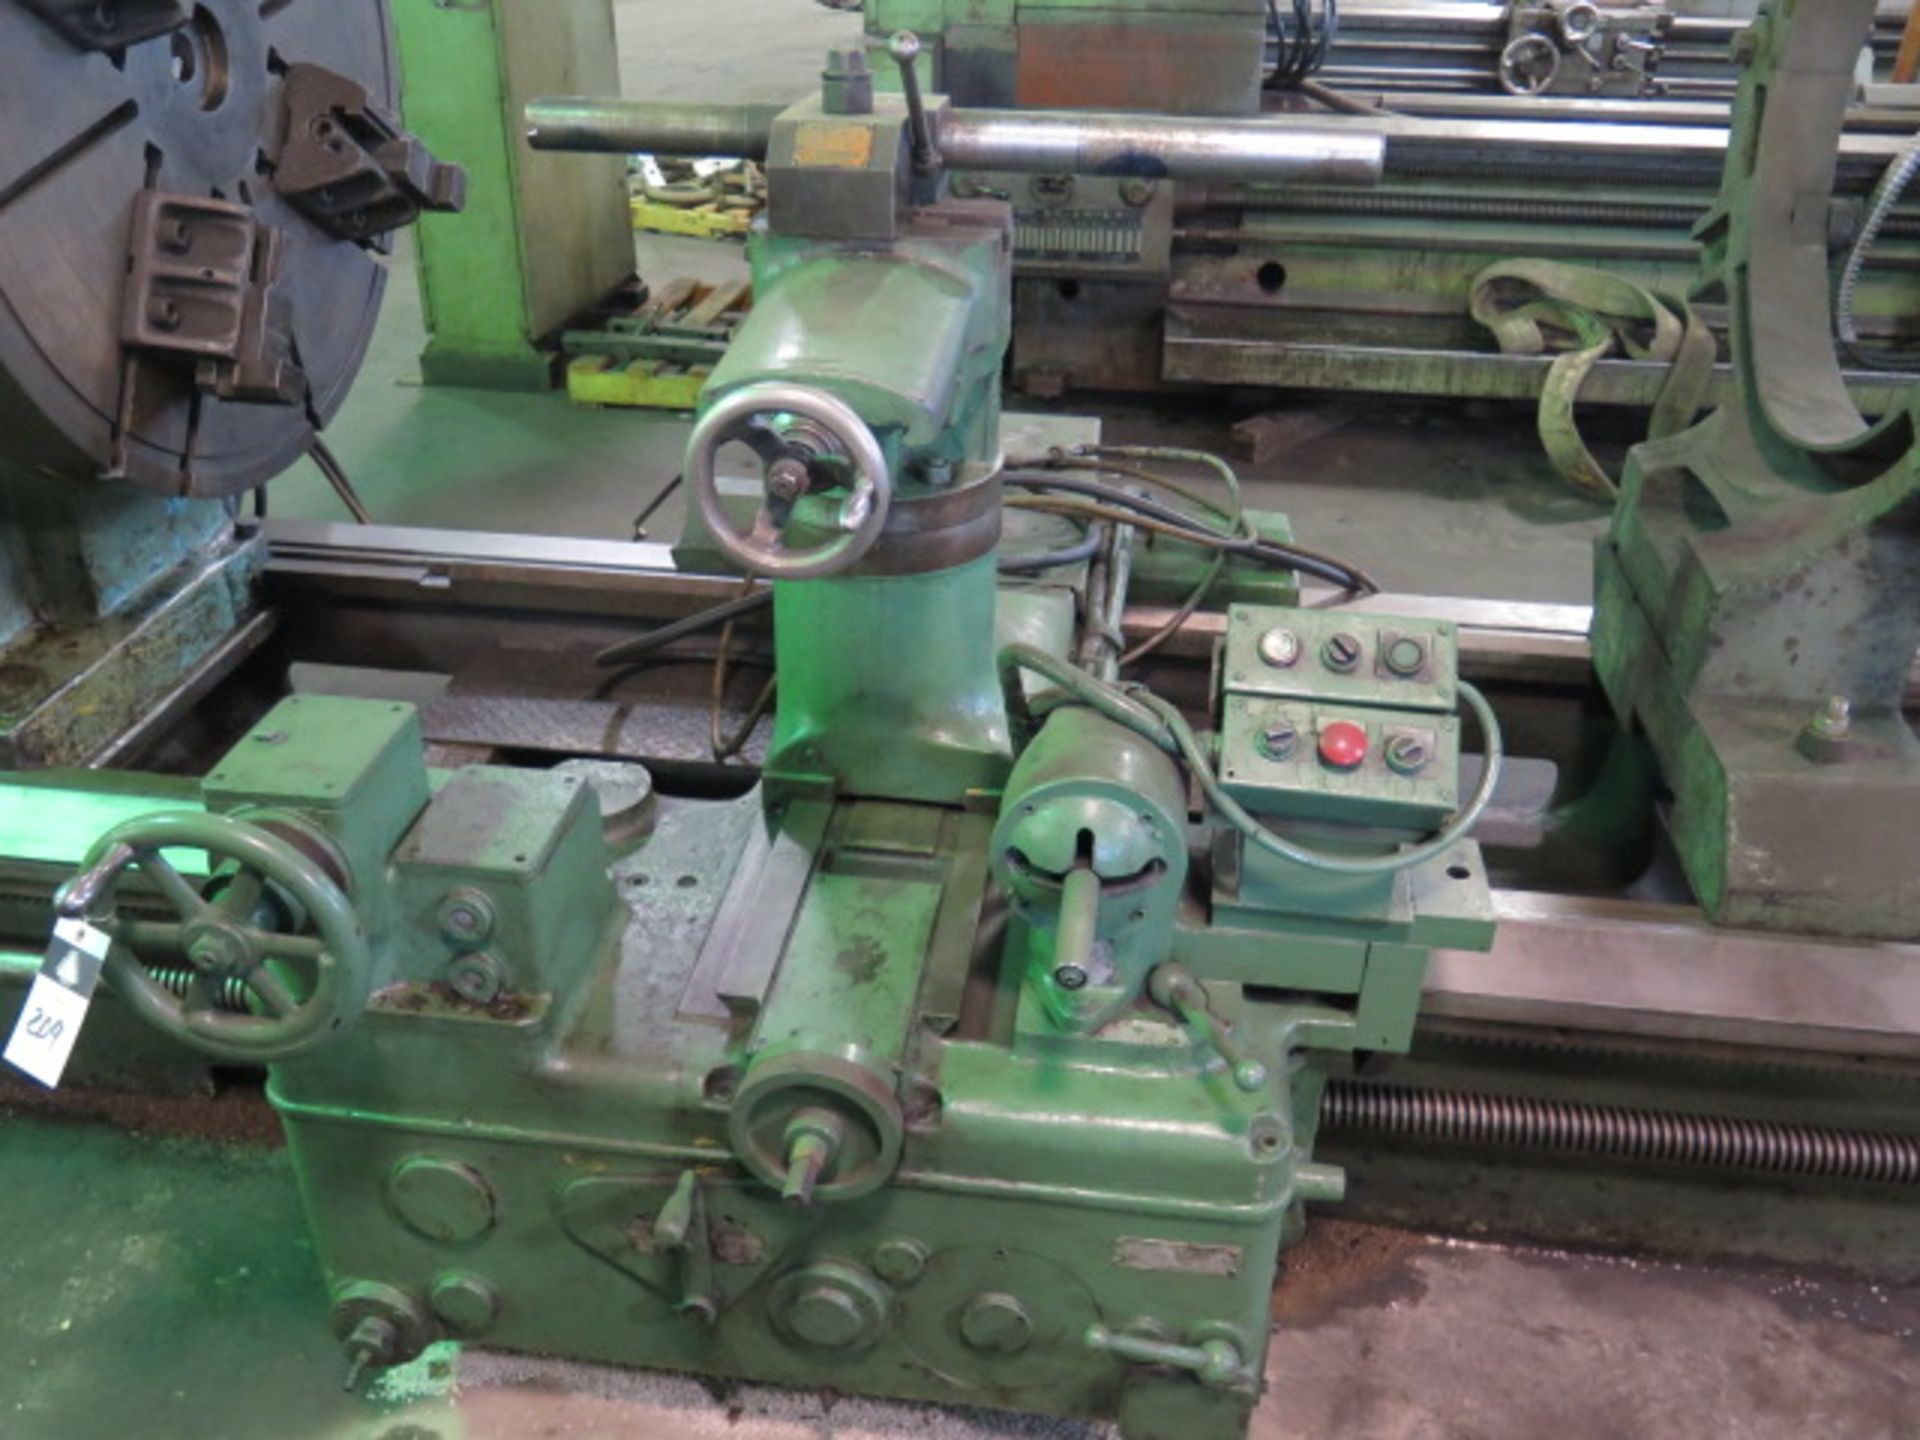 Niles A54P 62” x 140” Lathe s/n 23579 w/ 3.94-232 RPM, Inch Threading, Steady Rest, SOLD AS IS - Image 12 of 20